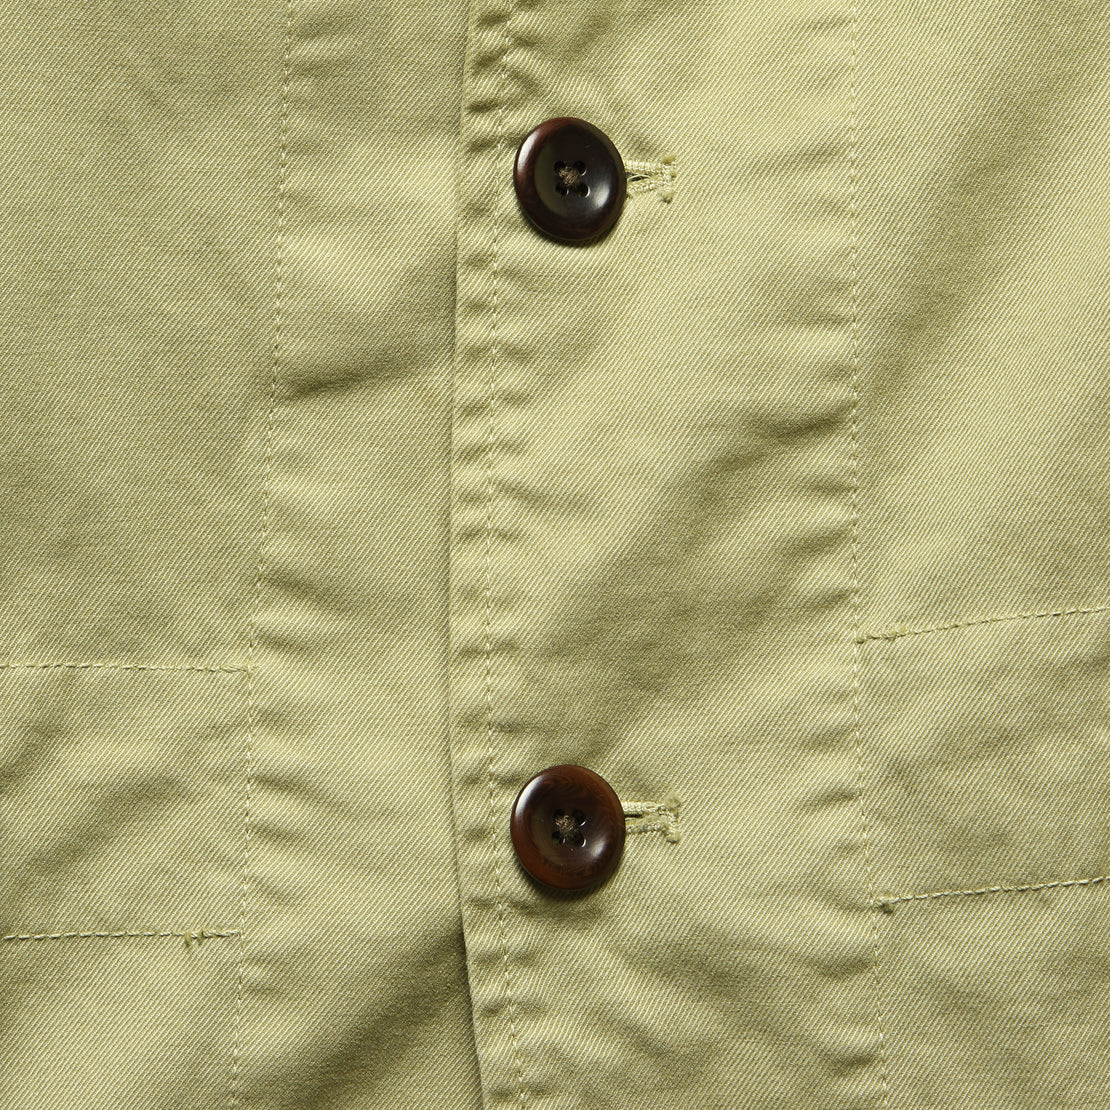 Twill Sack Jacket - Vintage Khaki - Alex Mill - STAG Provisions - Suiting - Sport Coat